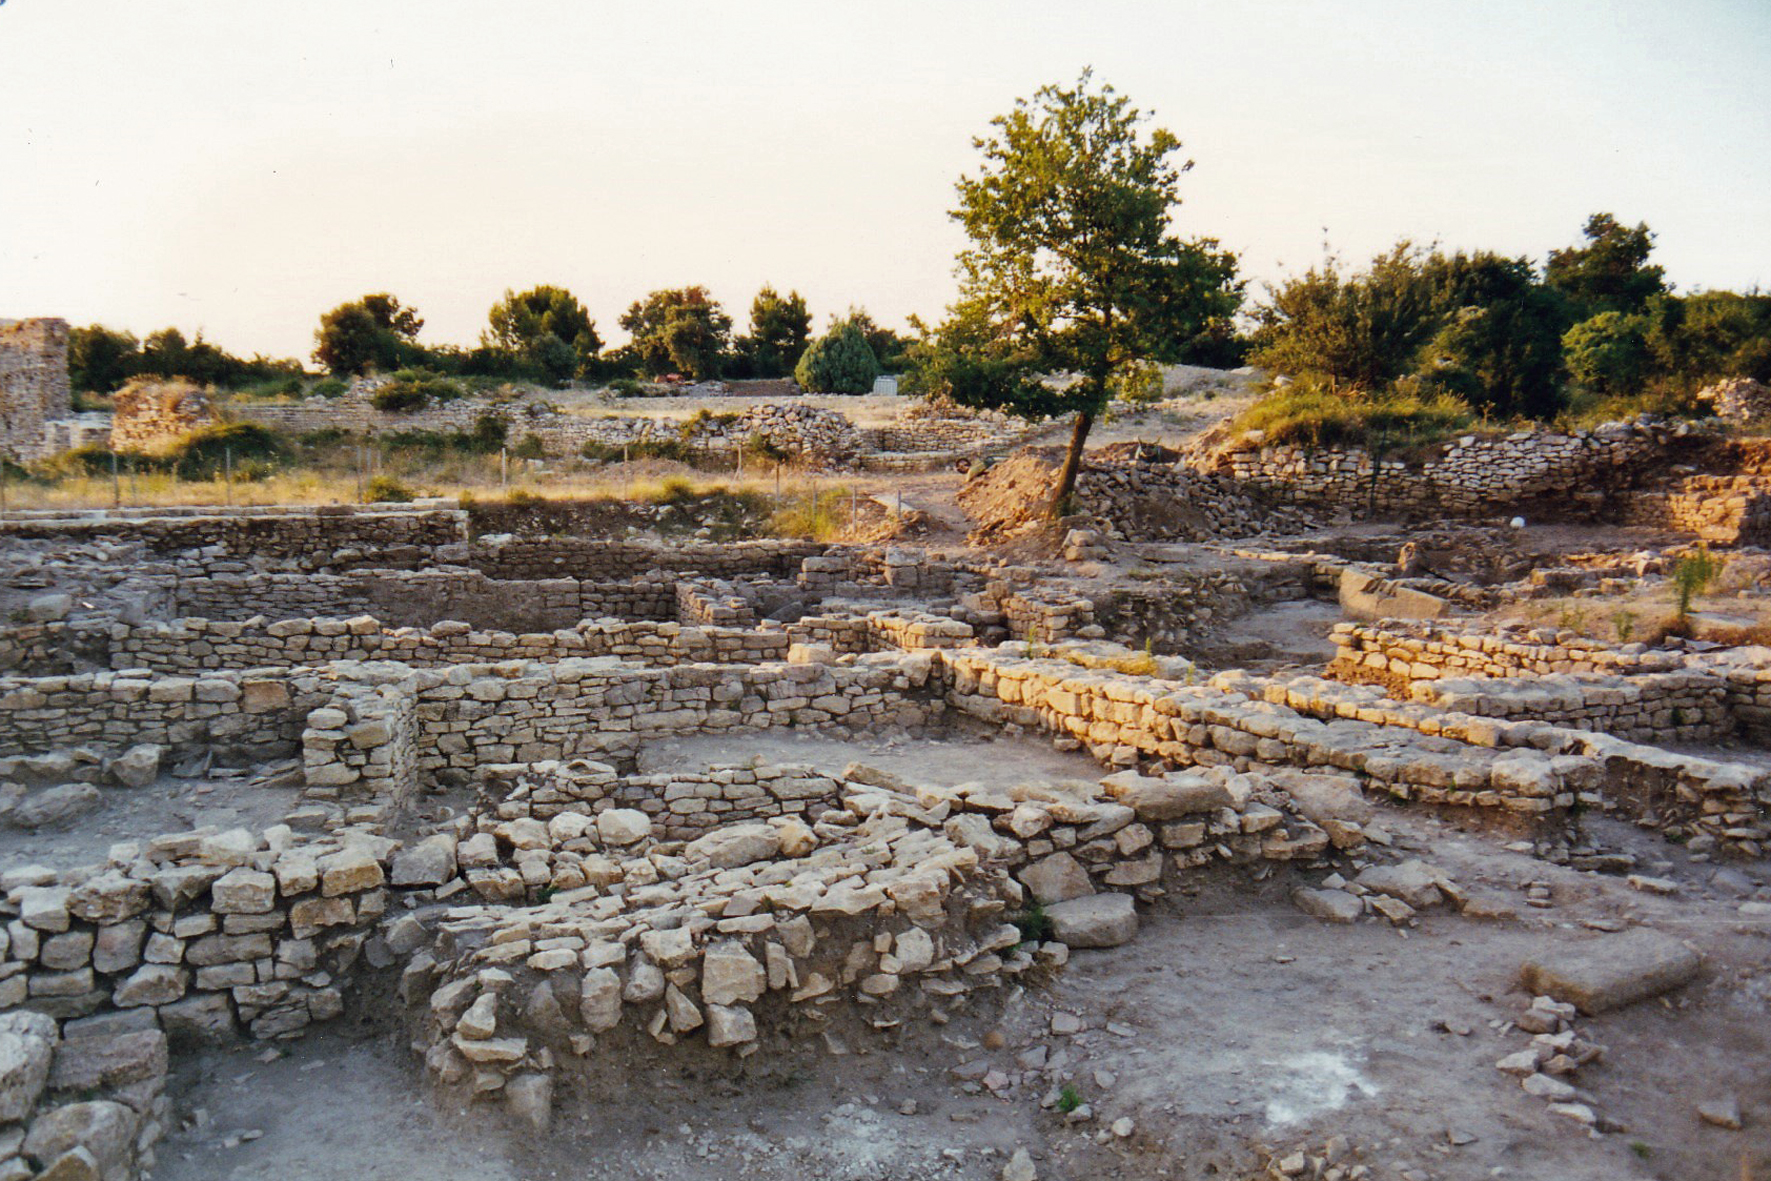 Some of the excavated and reconstructed Roman remains